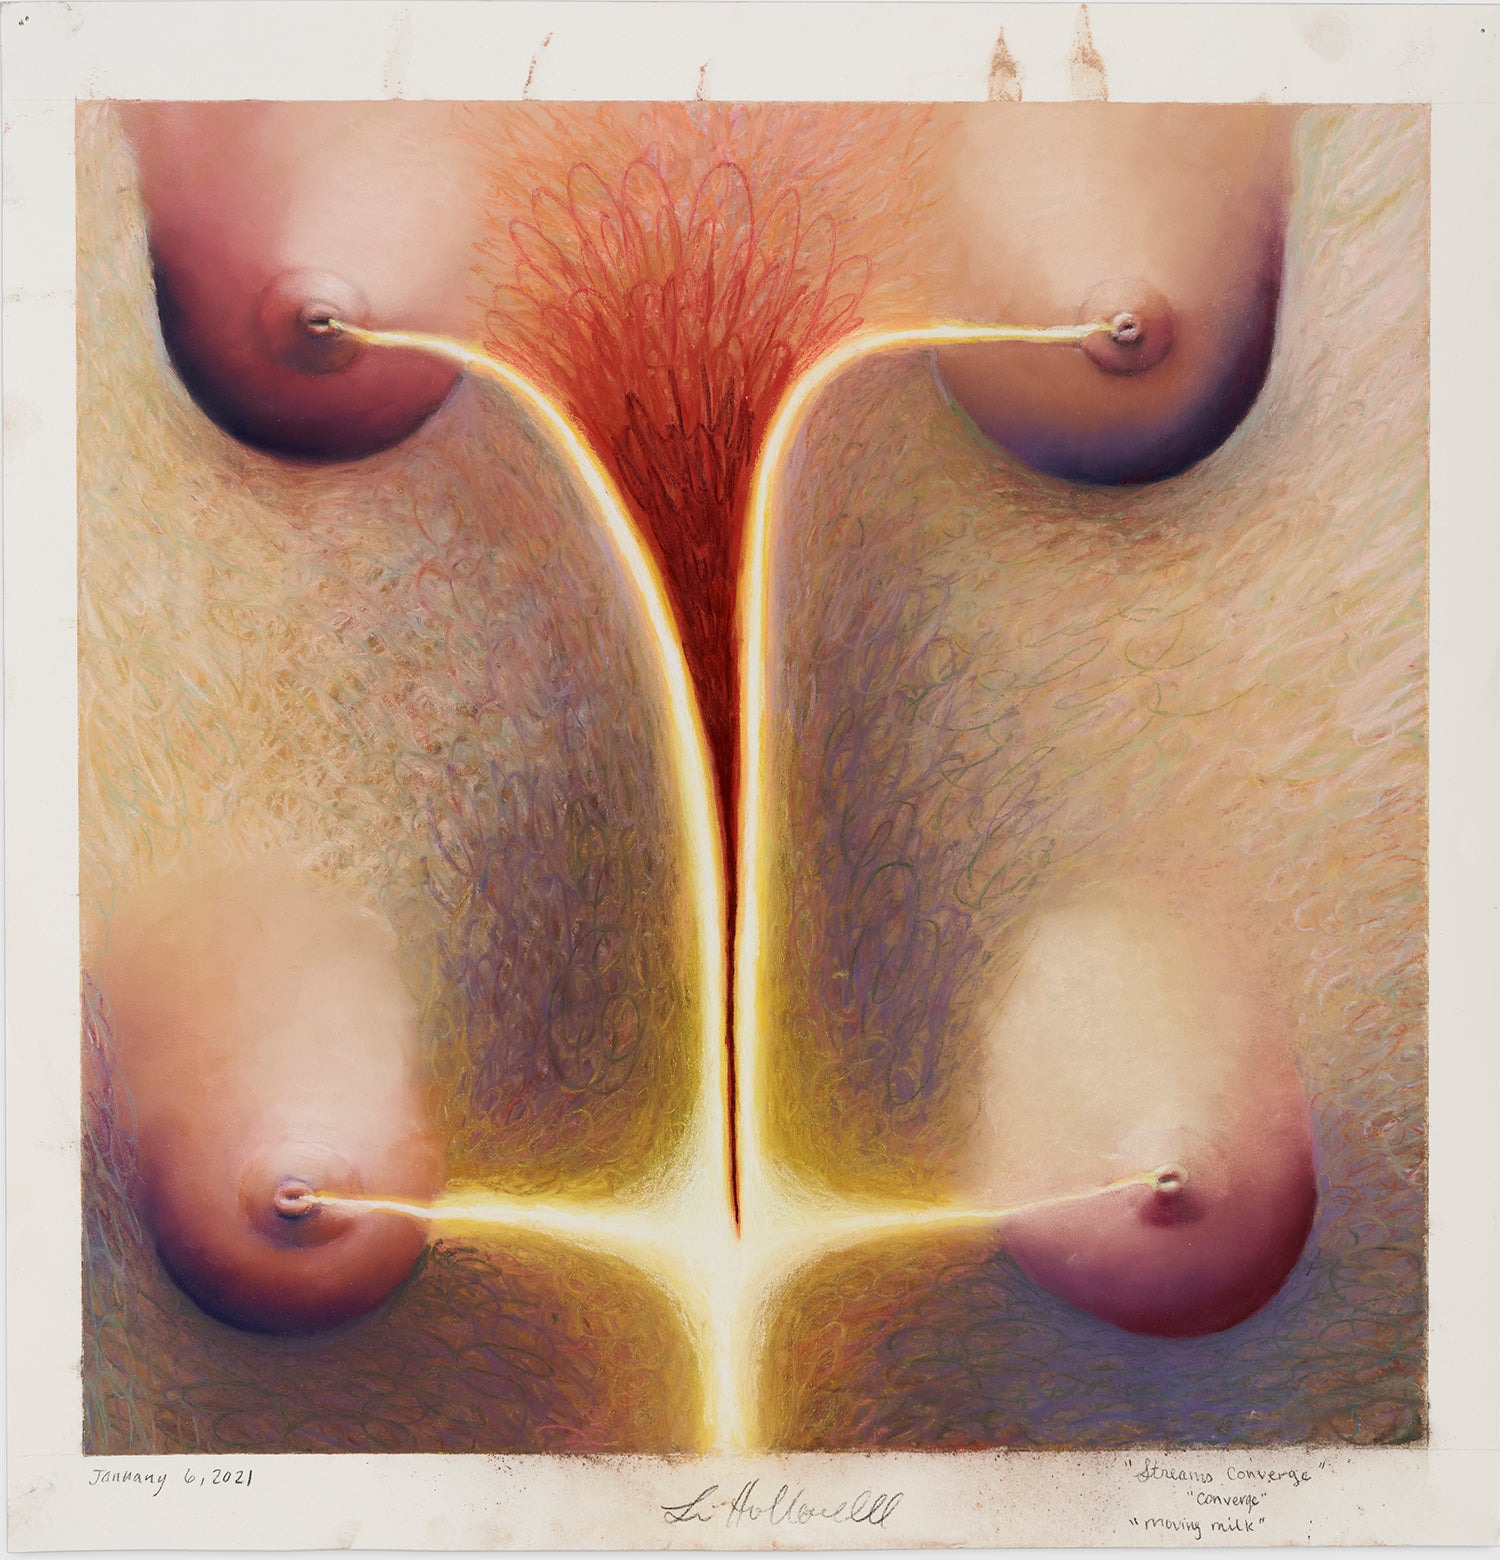 art work depicting four female breasts in purplek, red and yellow